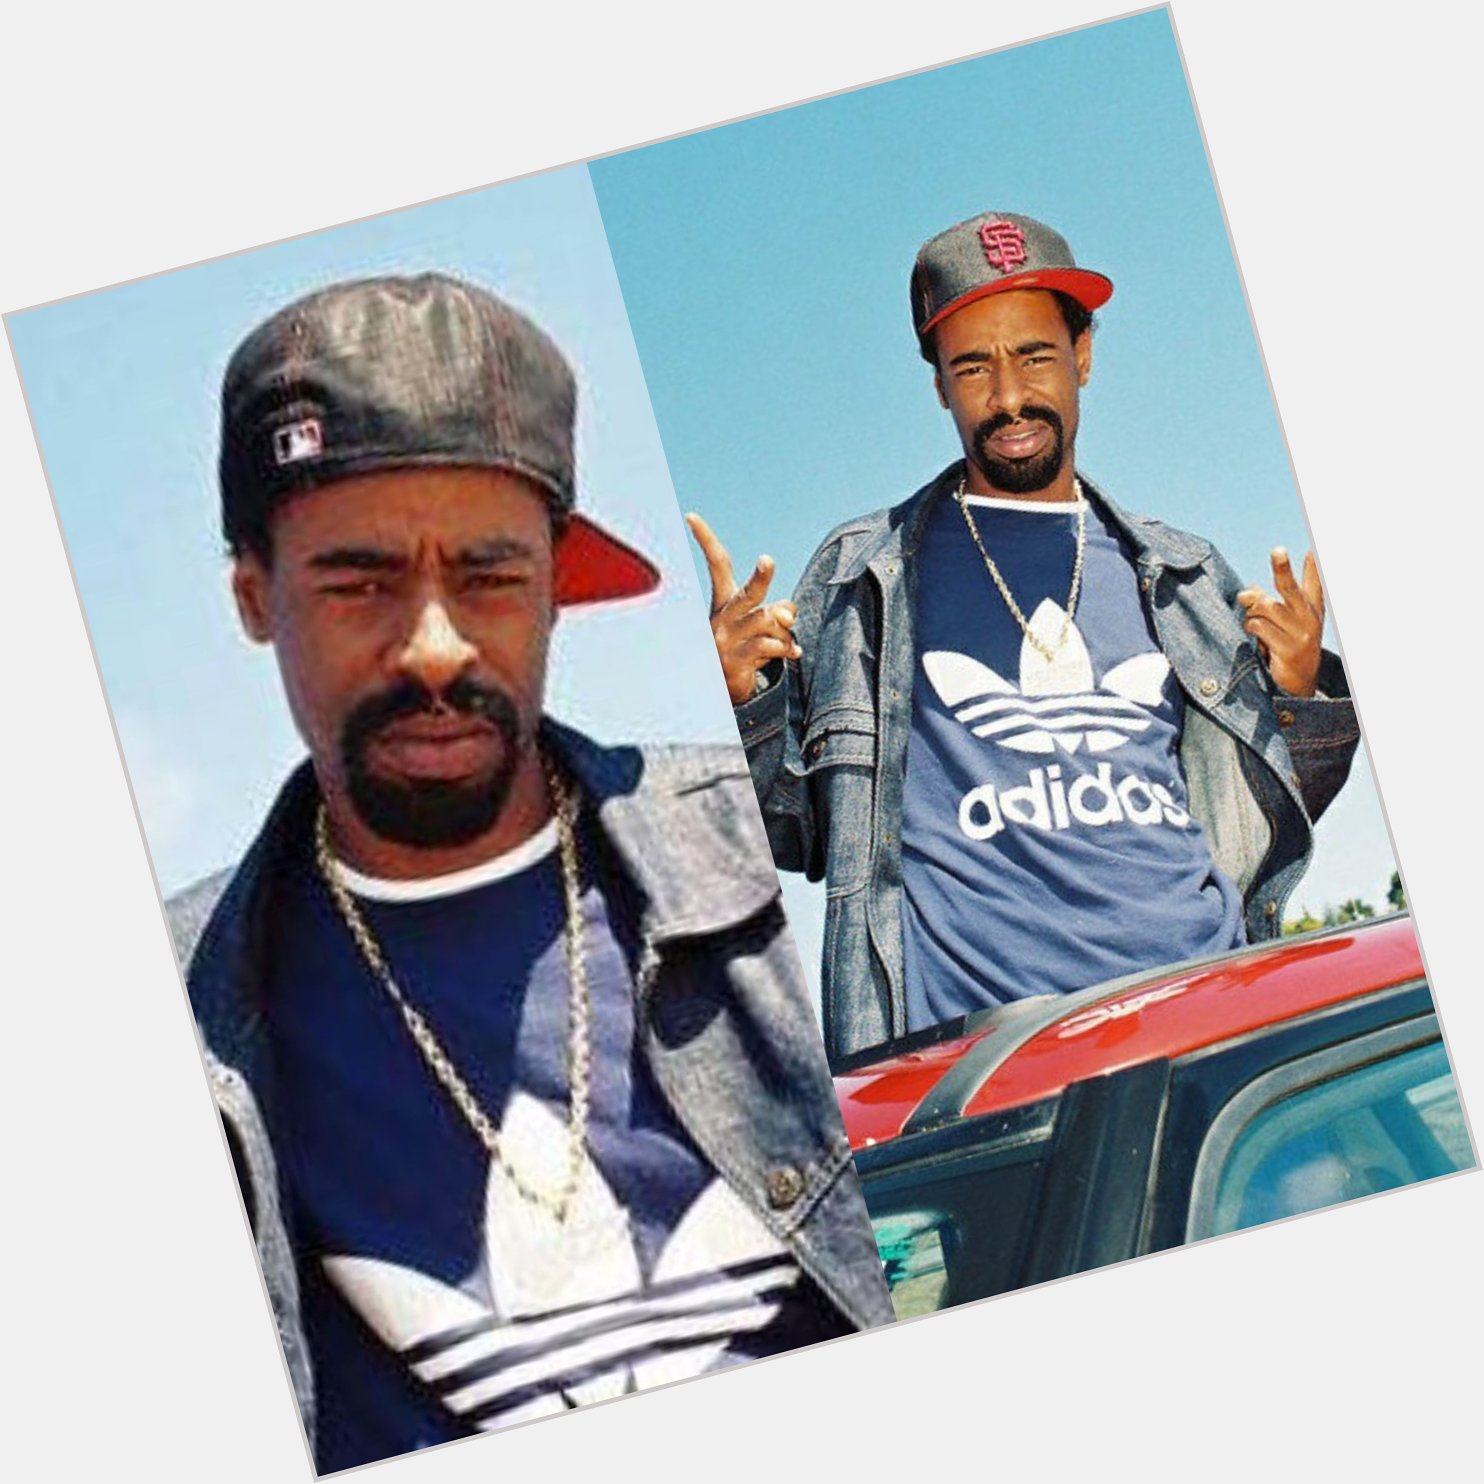 HAPPY 51ST BIRTHDAY AND REST IN HEAVEN TO THE BAY AREA LEGEND MAC DRE! 